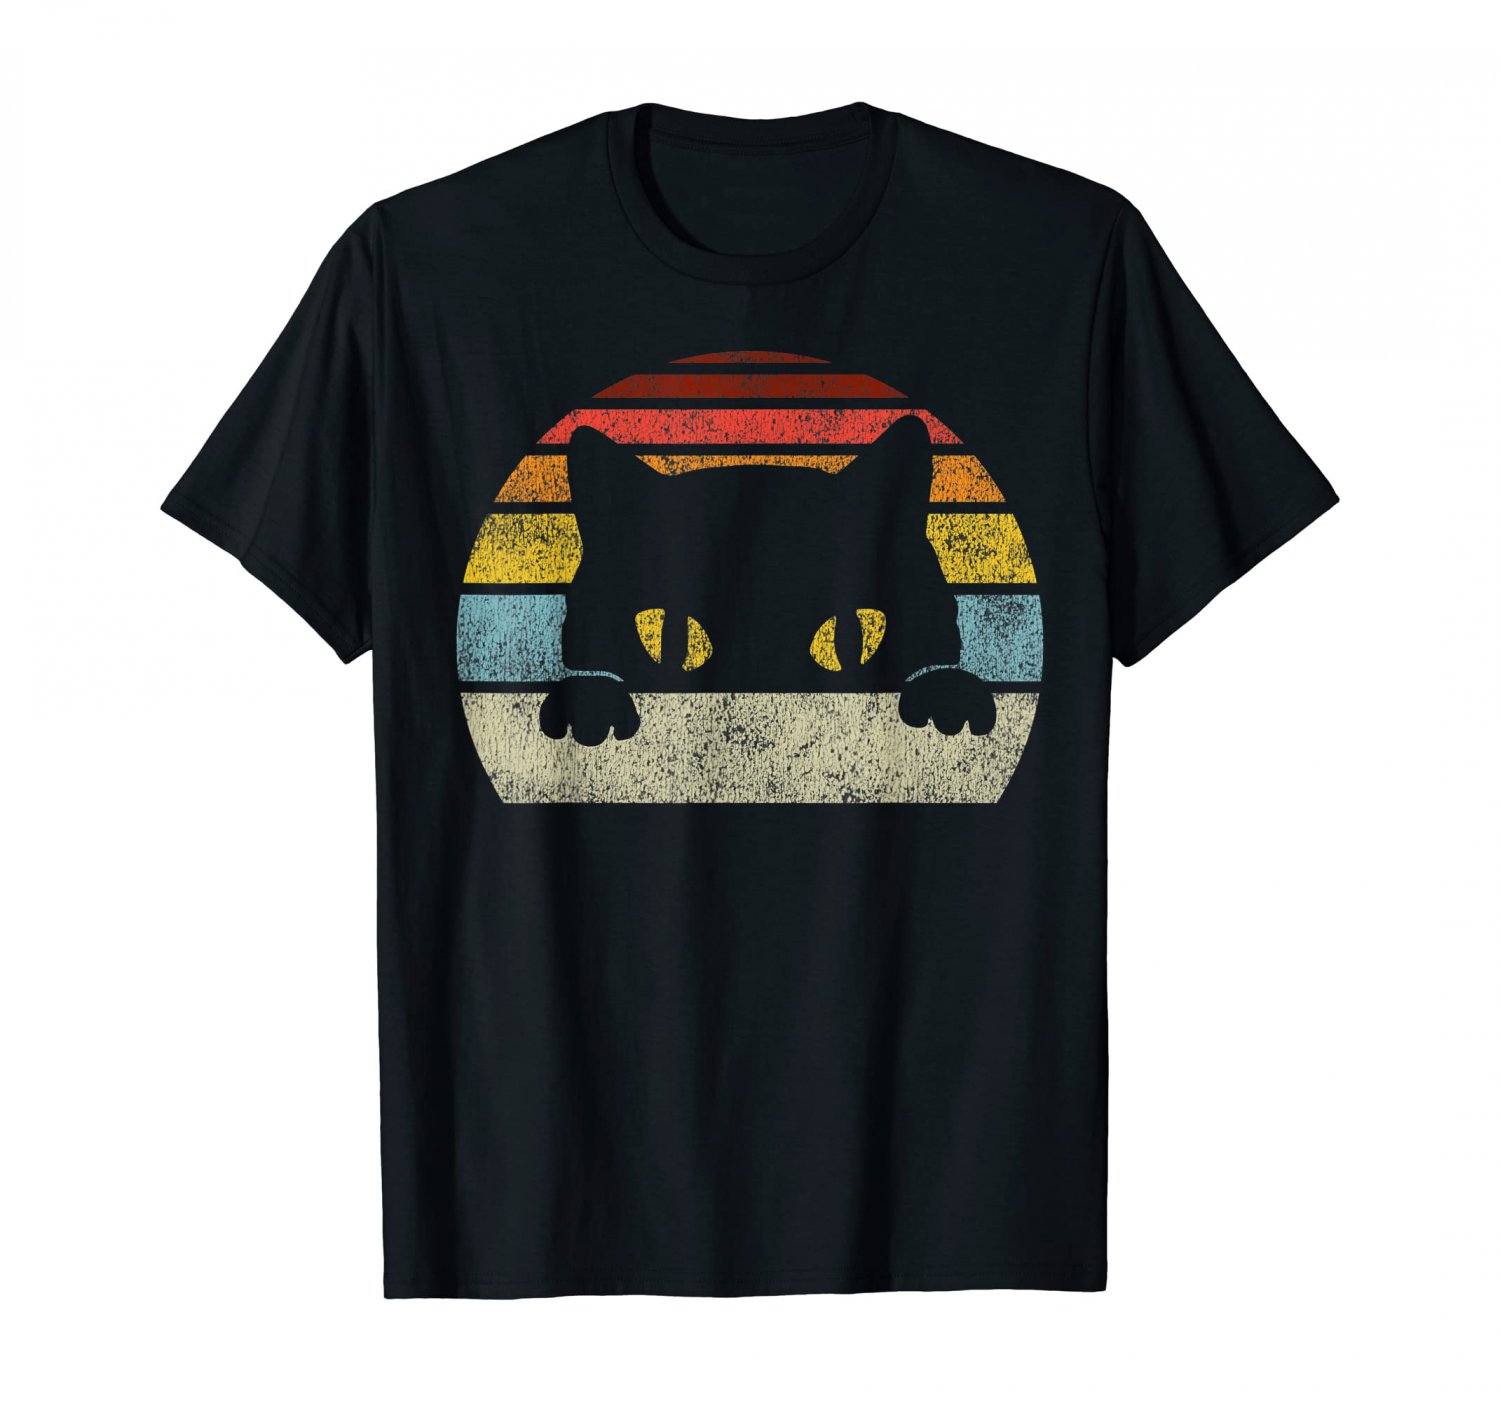 Vintage Black Cat Lover Retro Style Cats Gift T Shirt Tee Shirt S-2XL